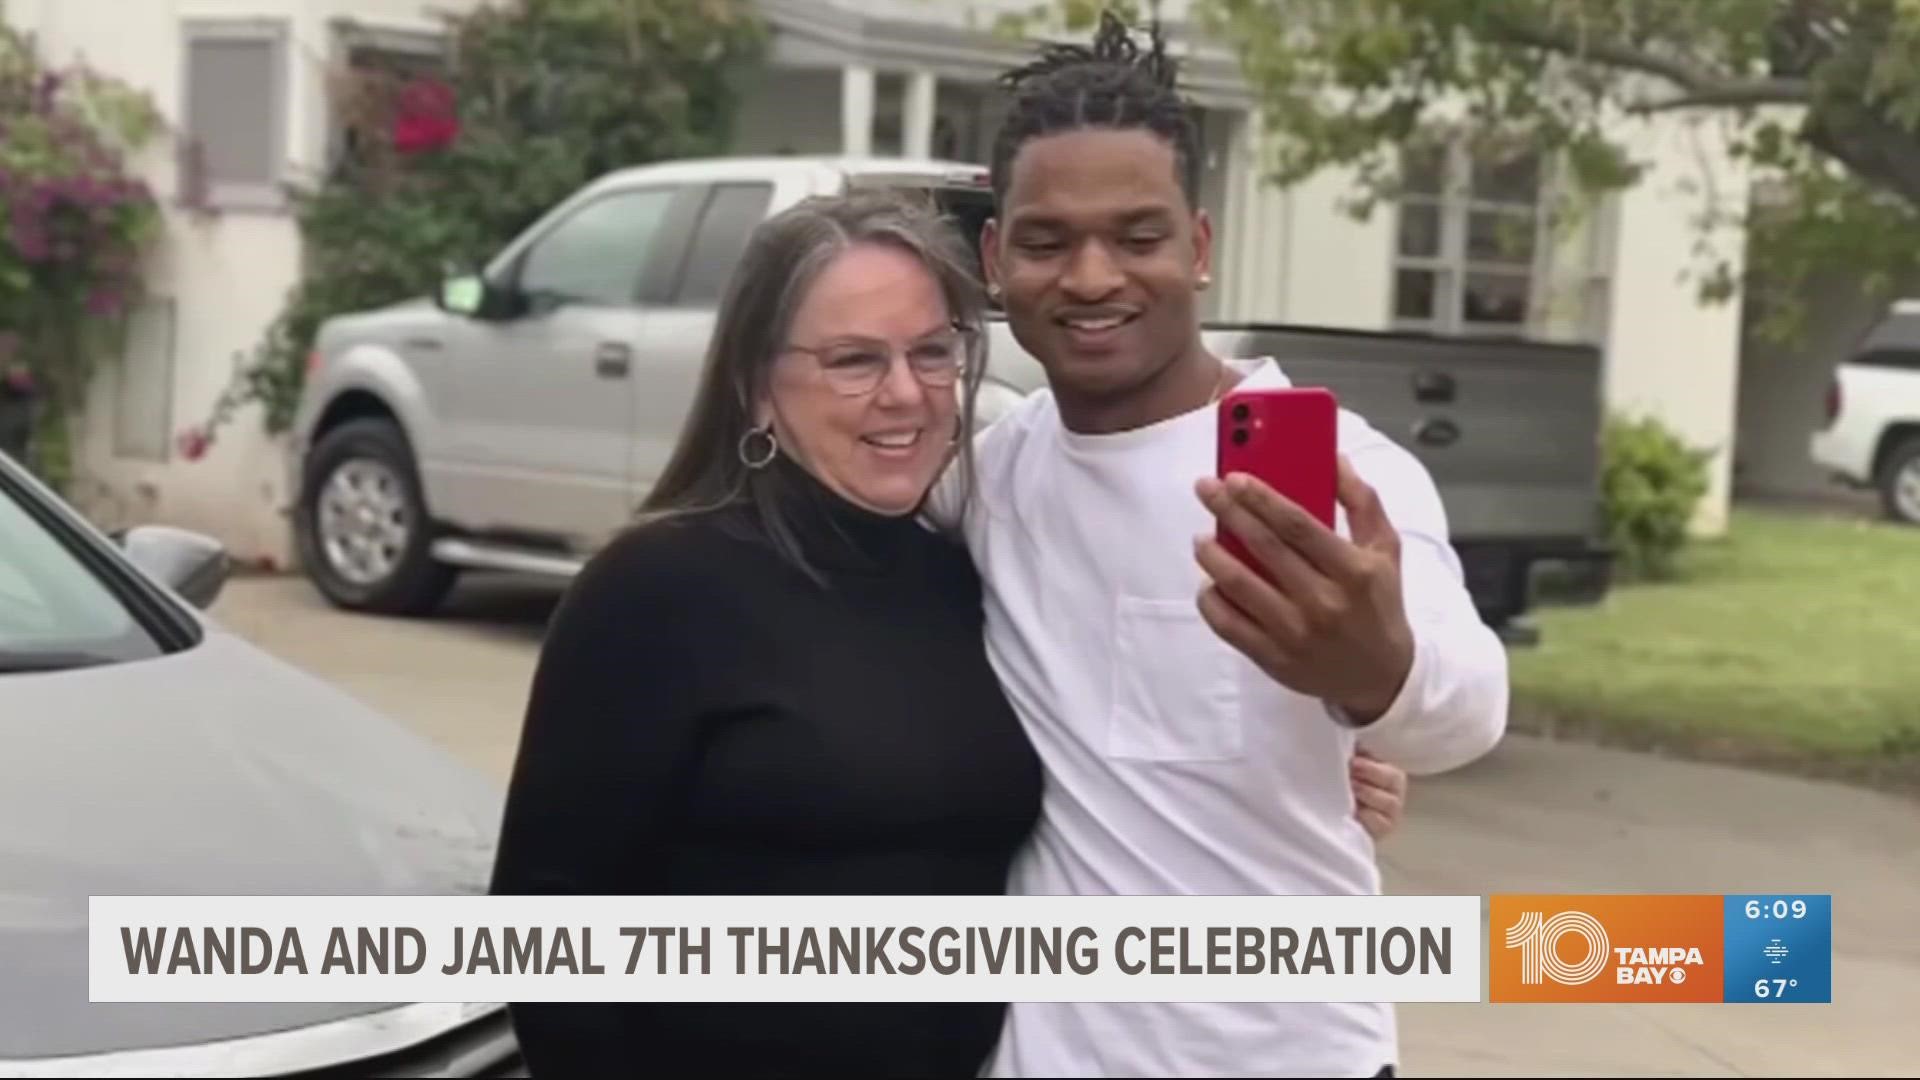 Back in 2016, Wanda texted a stranger thinking she was texting her grandson. The two have been celebrating the holiday together ever since.